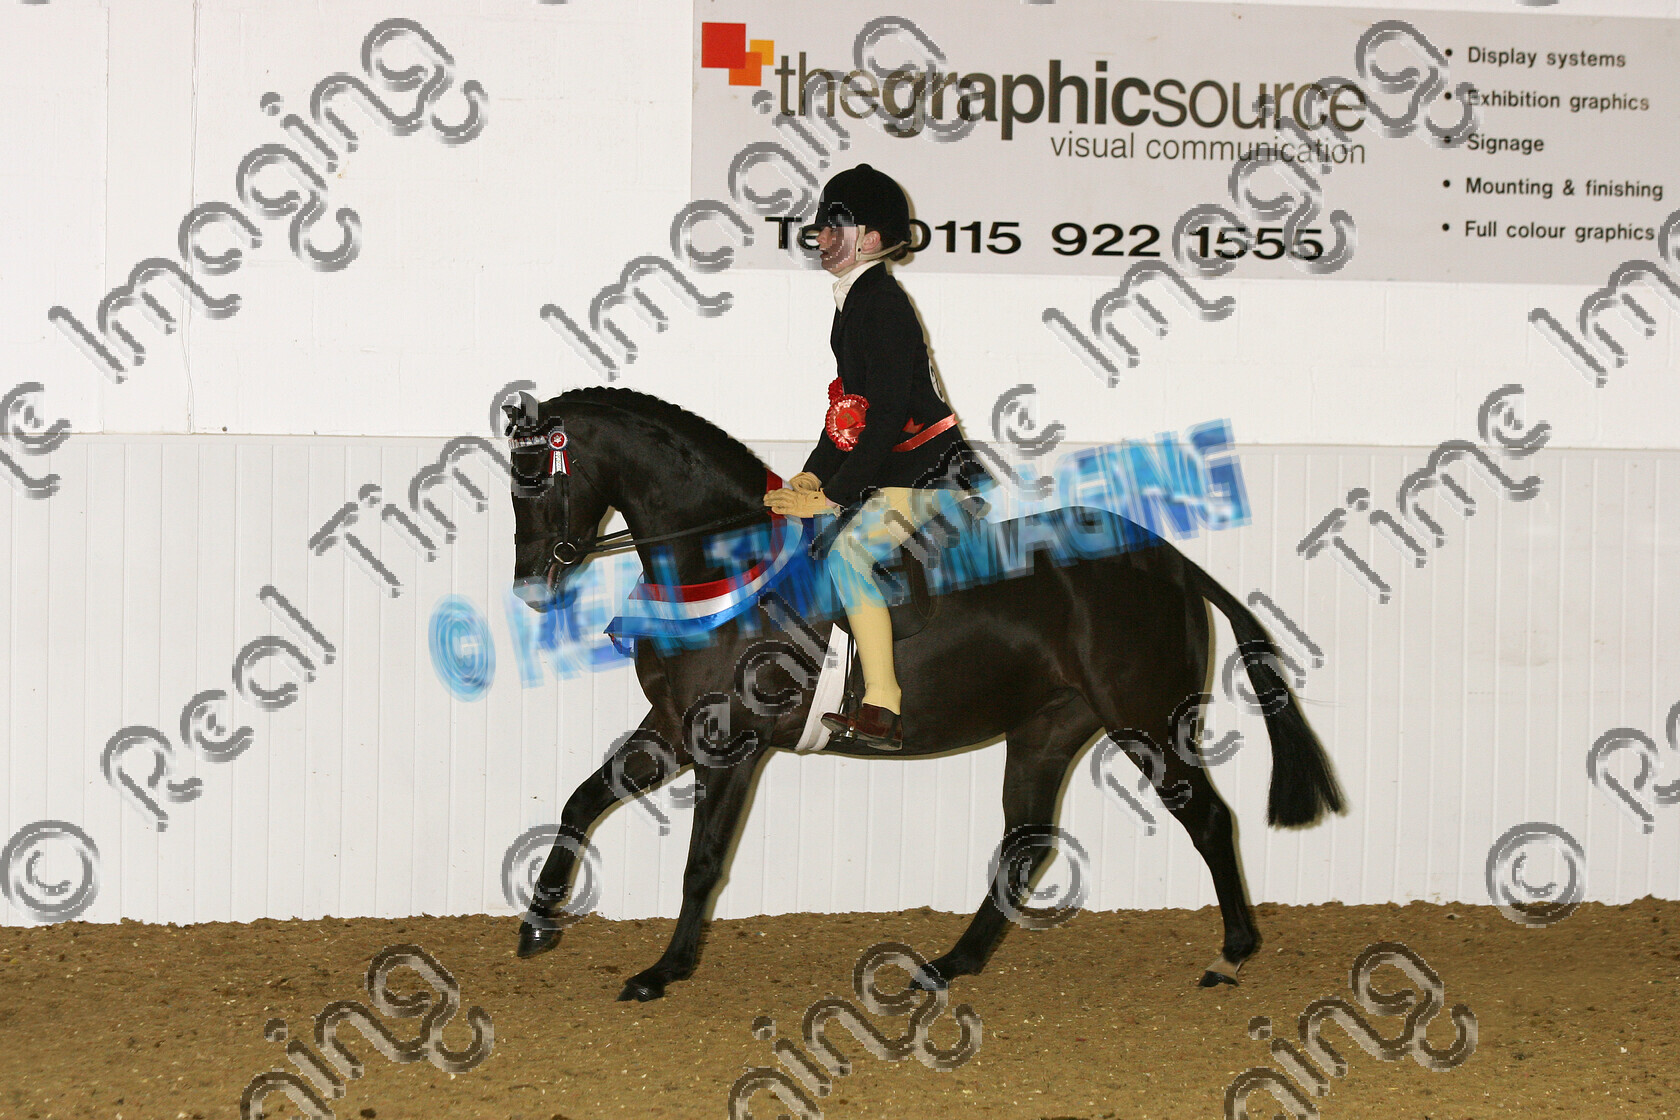 S07-14-15-324 
 Keywords: BSPS Winter Championship Show April 2007 Arena UK winner champion first place top placed Winter Novice Show Pony Champion 232: PENNYMORE ISADORA O: Sir frank Barlow R: Lizzie Smith black mare rosette rosettes sash sashes canter cantering action moving flat lap of honour